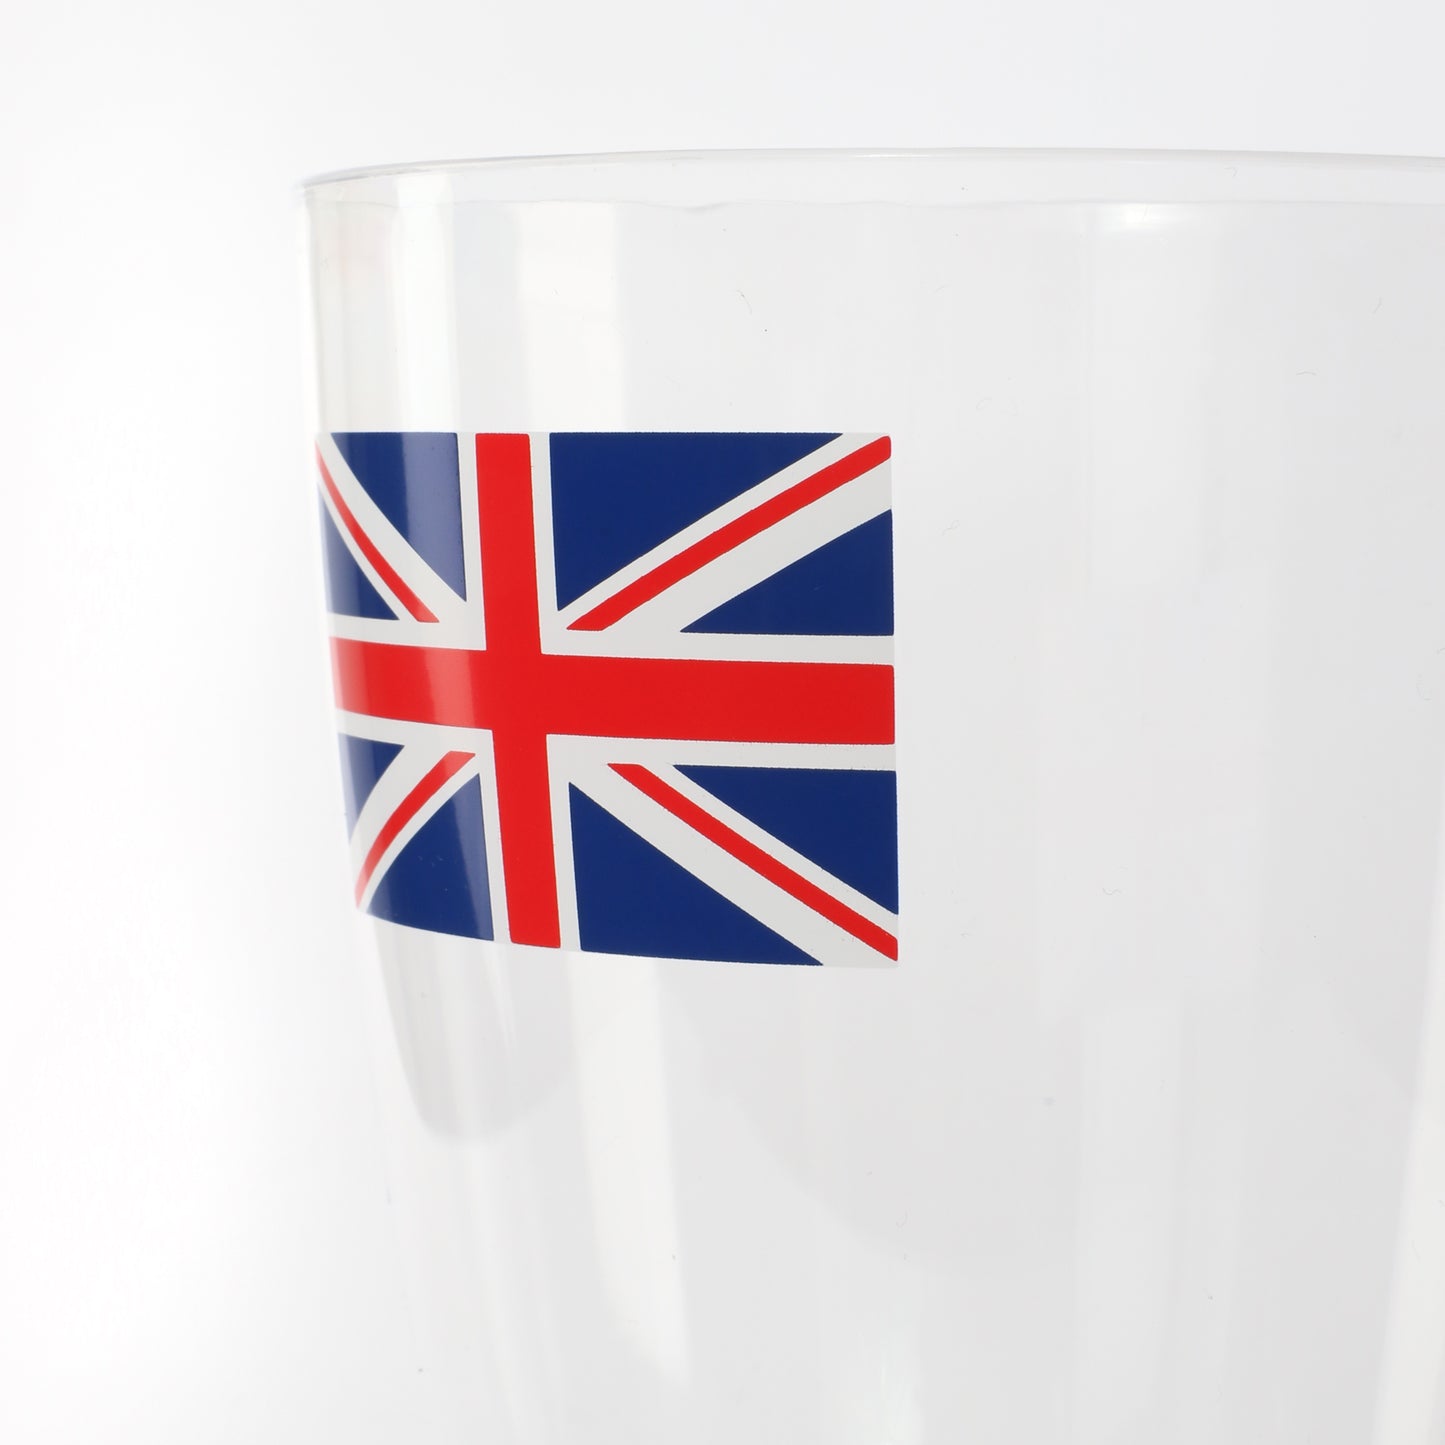 568ml HEAVY DUTY PLASTIC DISPOSABLE UNION JACK PINT CUP IN PACKS 6